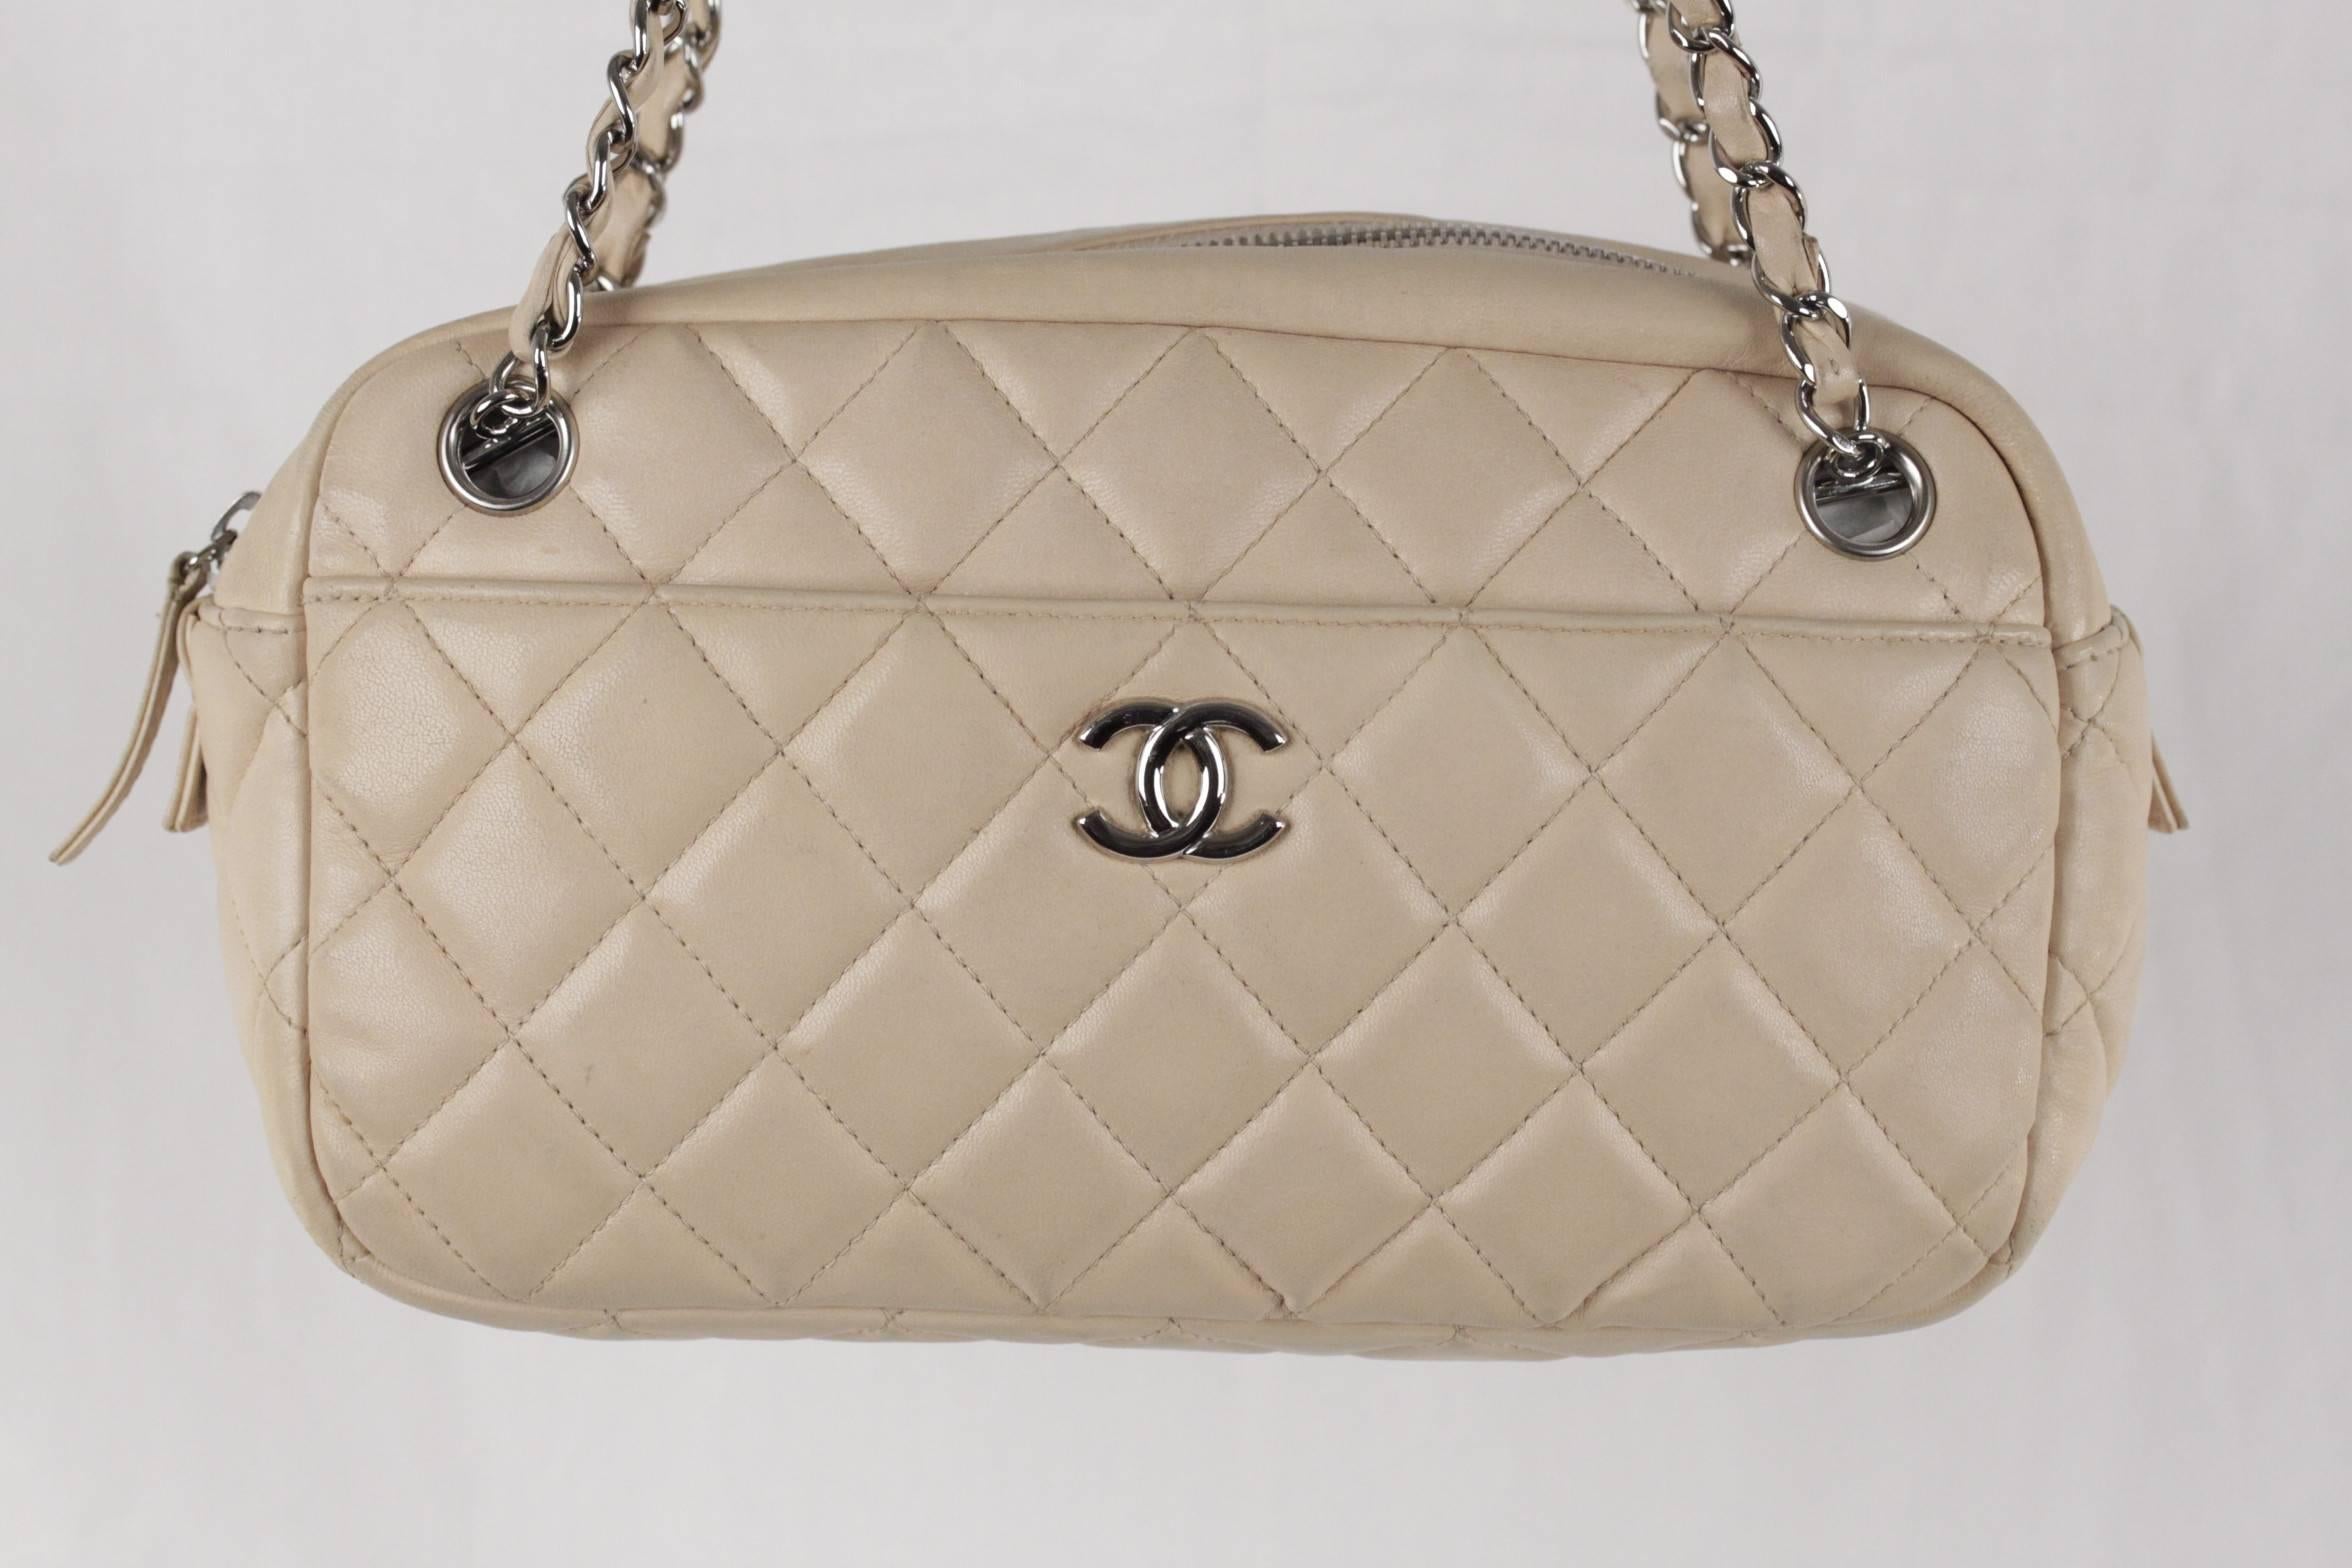  - CHANEL Leather quilted Camera Case Shoulder Bag
- Beige diamond quilting
- 1 wide front pocket with silver CC - CHANEL logo
- Silver shoulder chains threaded with beige leather
- 1 rear patch pocket
- Upper zipper closure
- Beige leather